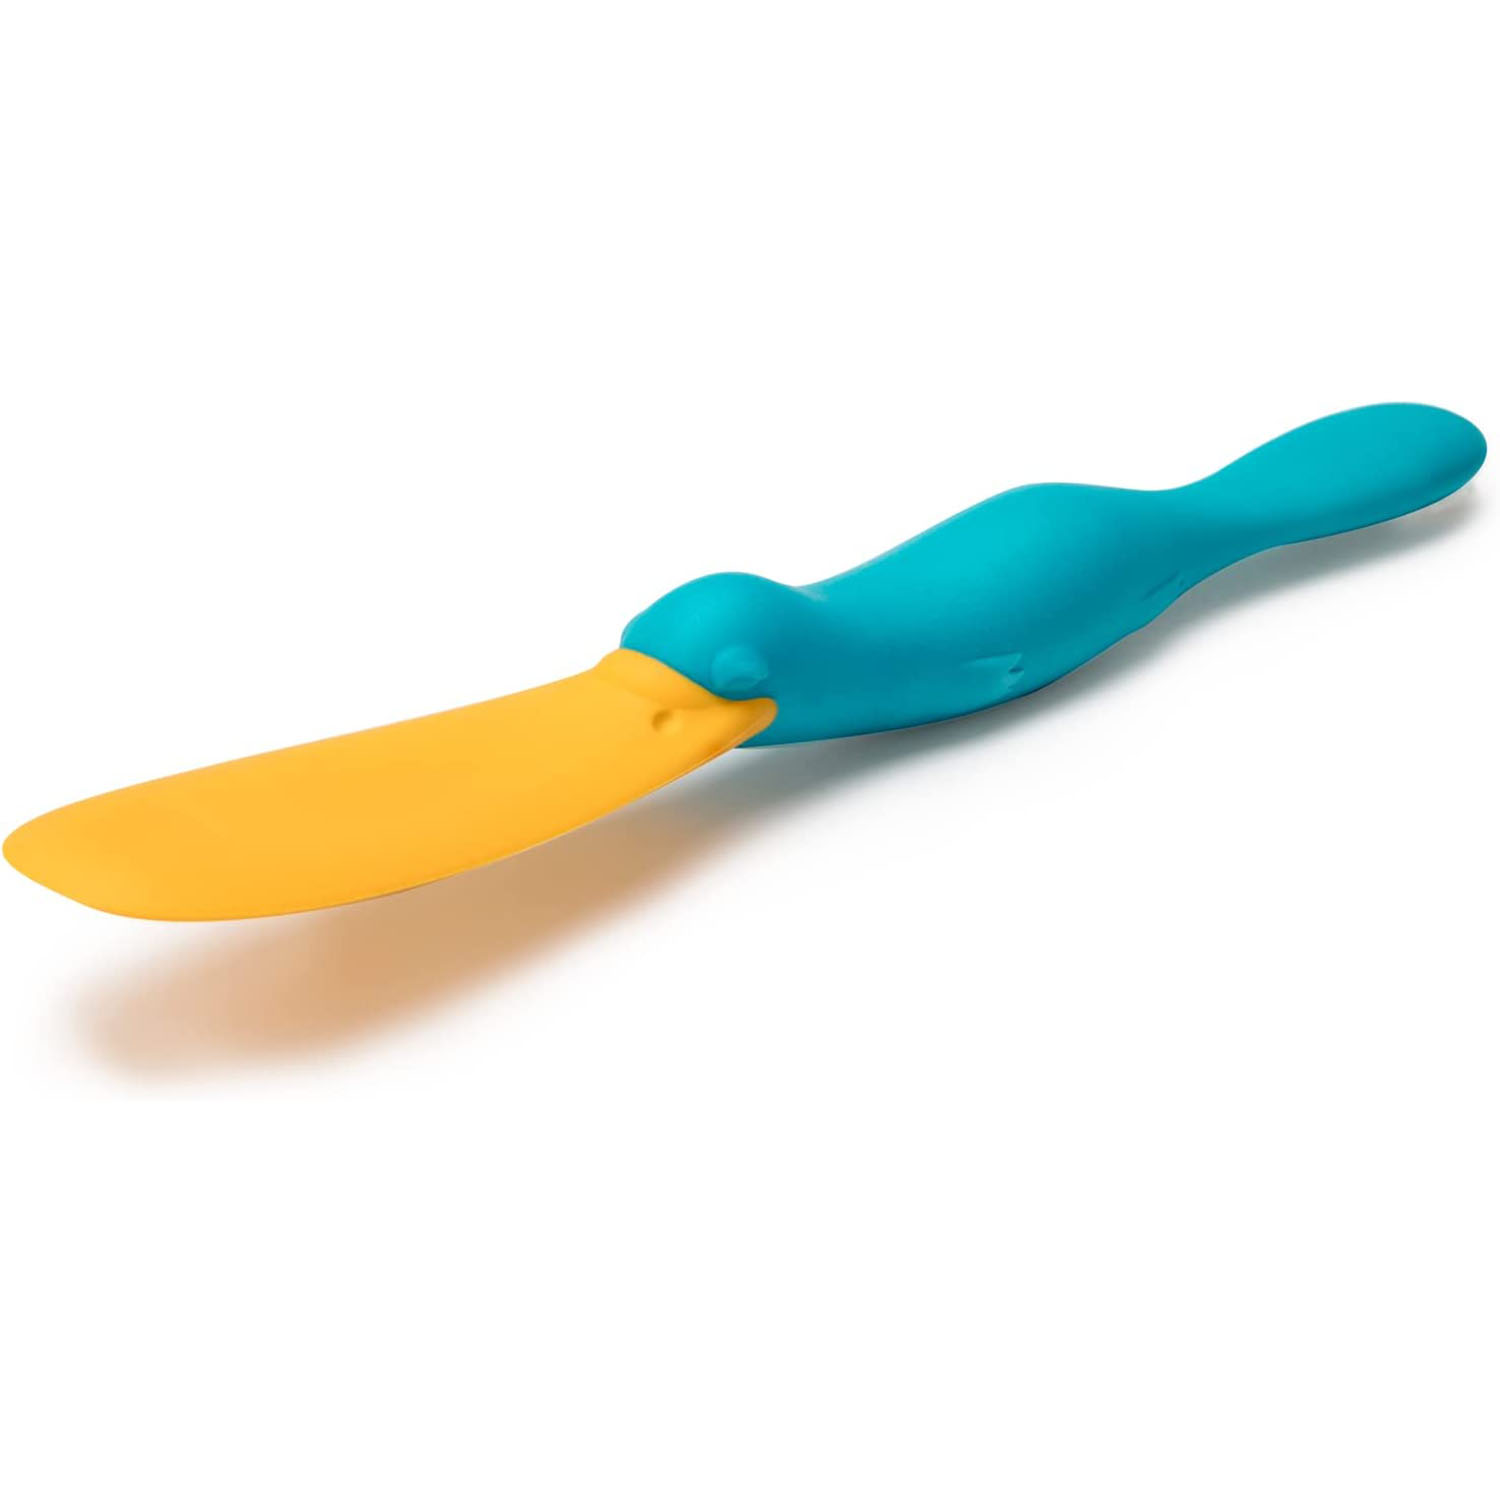  1PC Adorable Platypus Jam Spoon Silicone Scraper Sauce Jar  Spatula Versatile Kitchen Tool Cheese Spreading Brush Kitchen Essential  Tool for Cooking Baking: Home & Kitchen